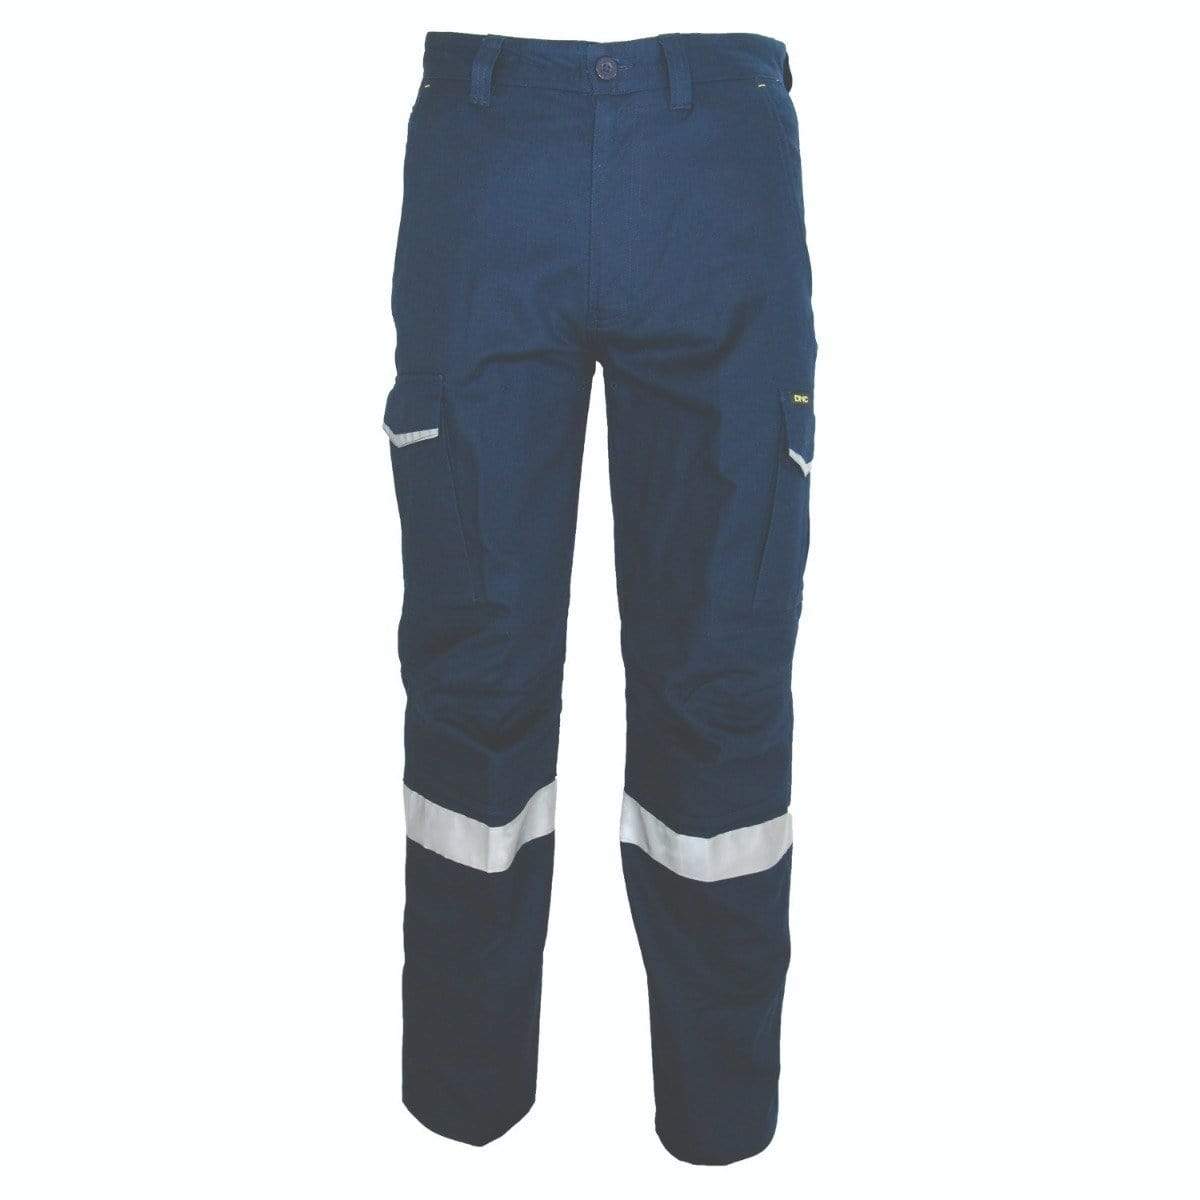 DNC Workwear Work Wear DNC WORKWEAR Ripstop Cargo Pants with CSR Reflective Tapes 3386